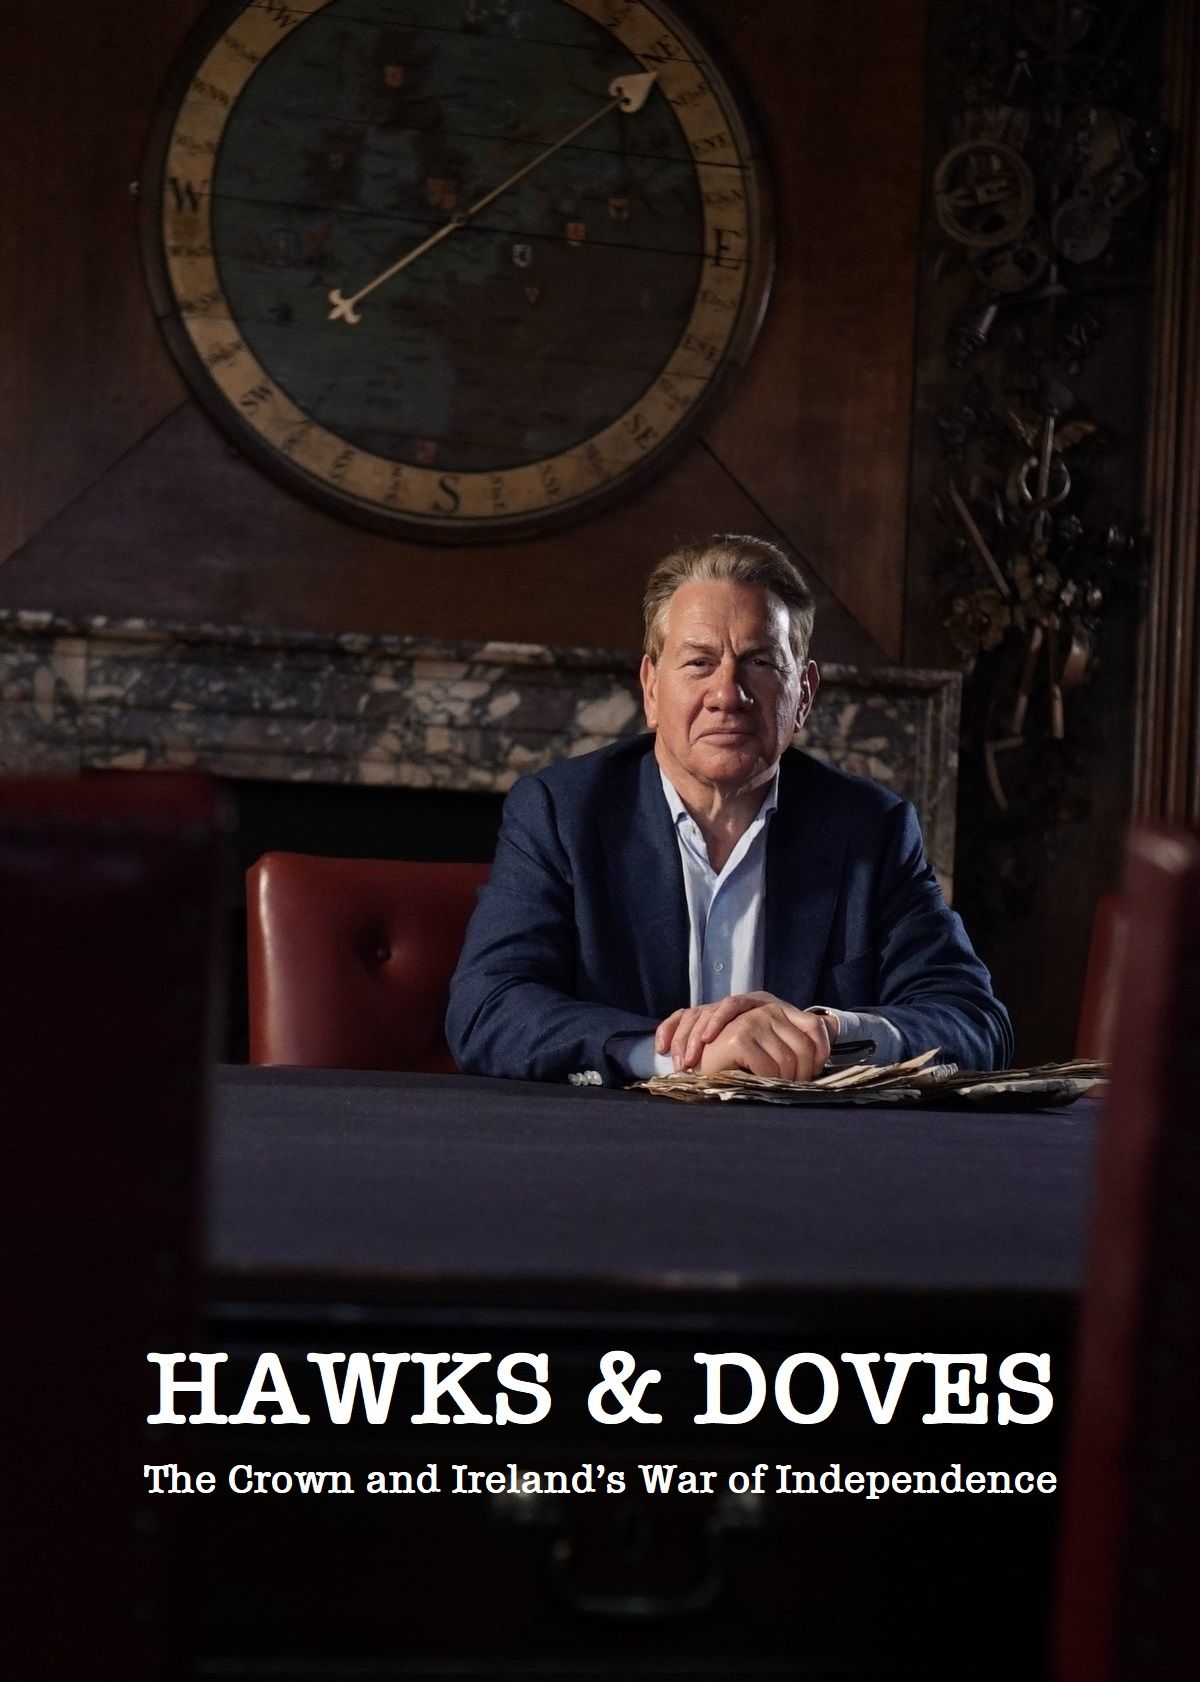 Hawks & Doves: The Crown and Ireland's War of Independence